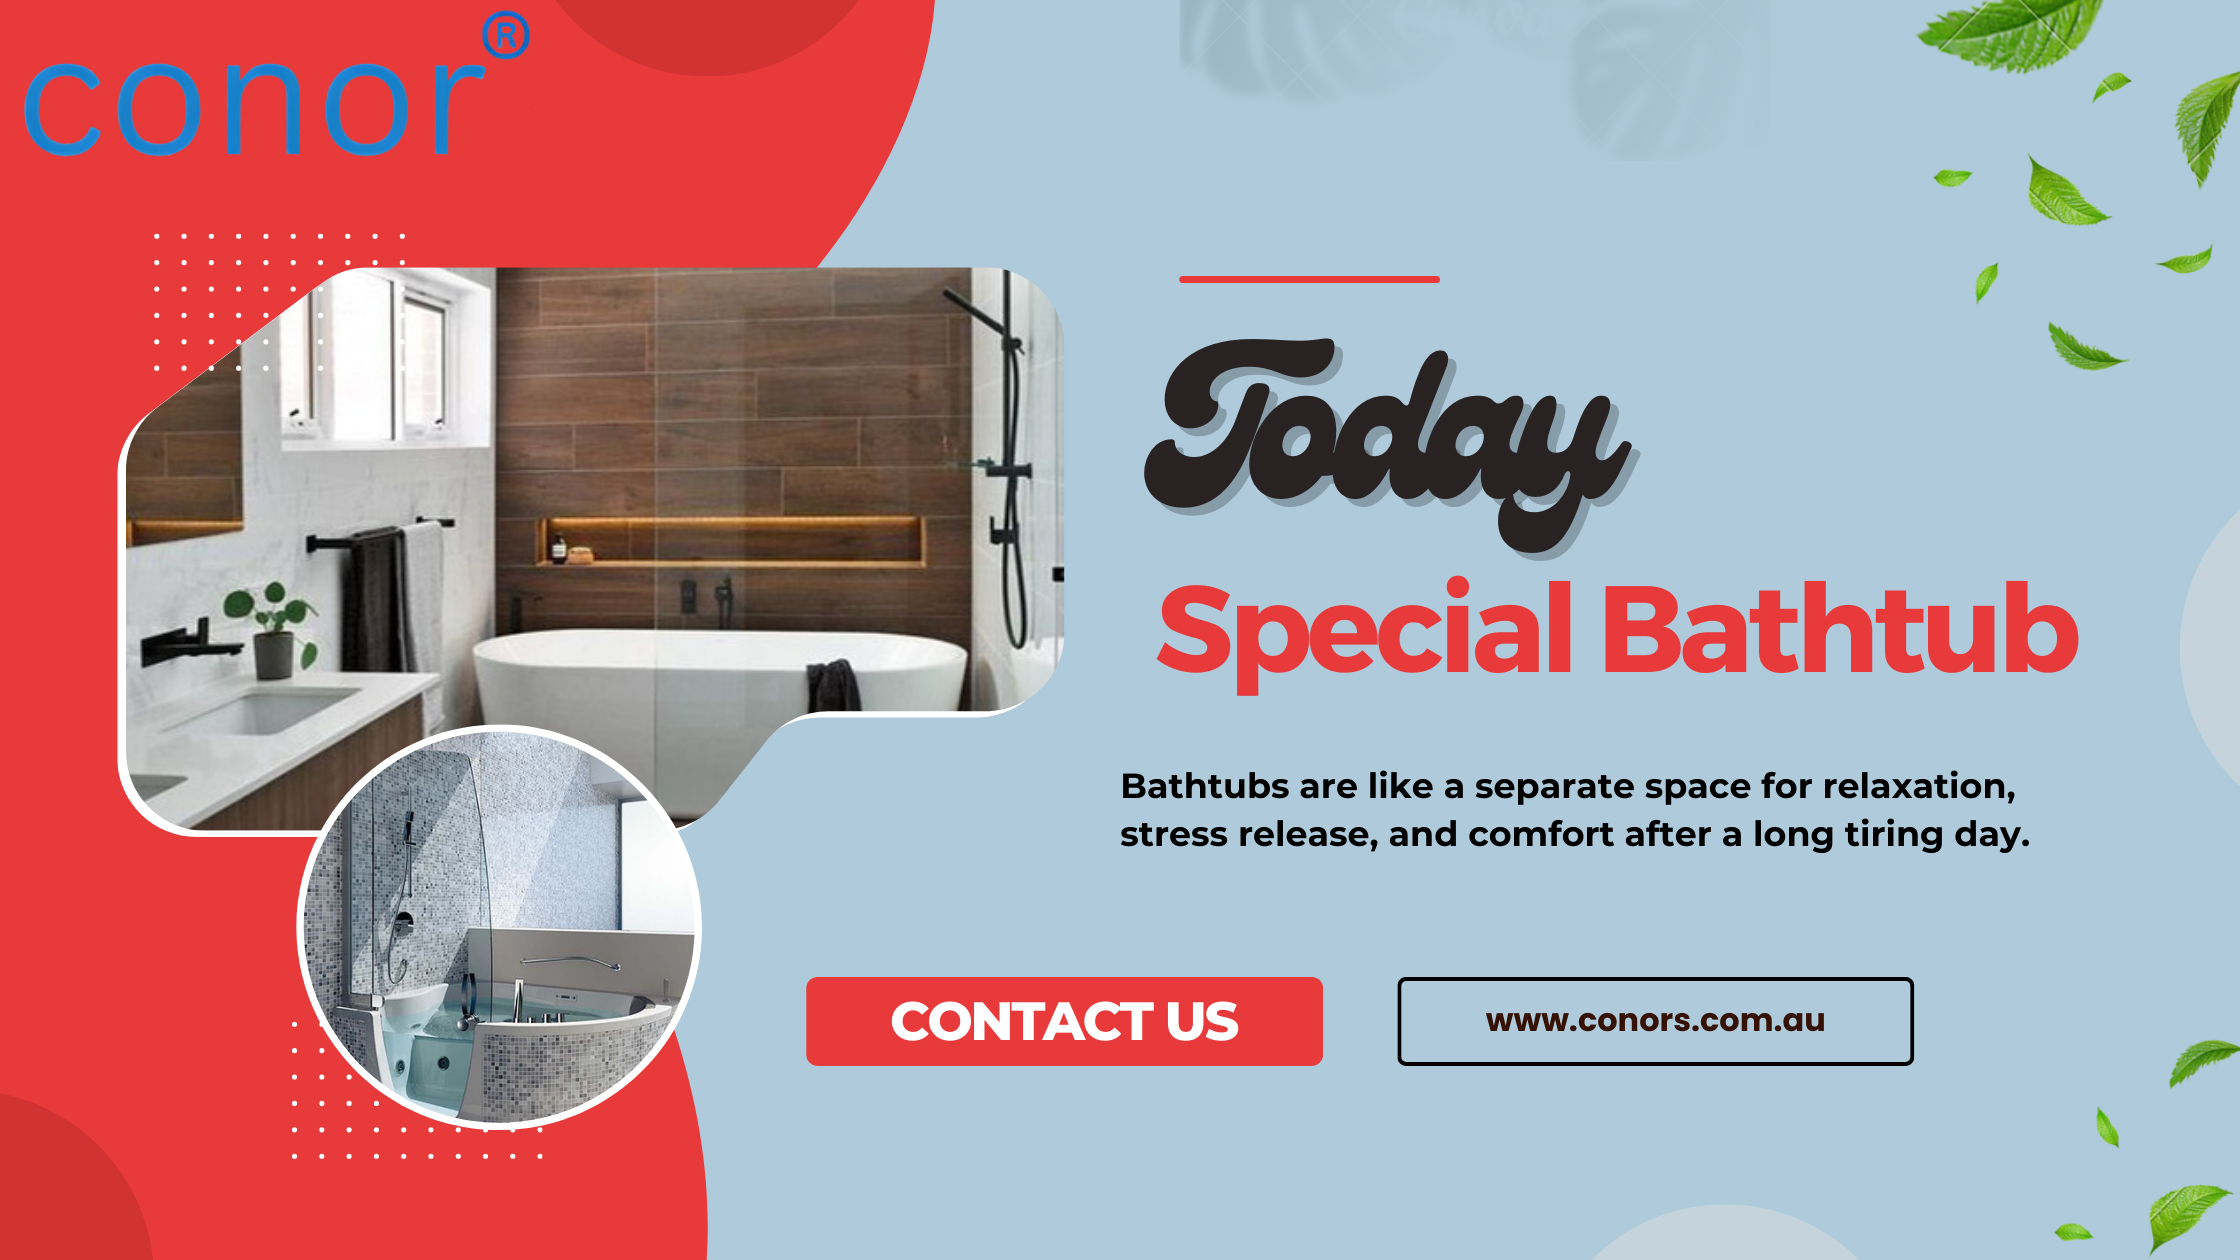 What are the different types of Bathtubs?